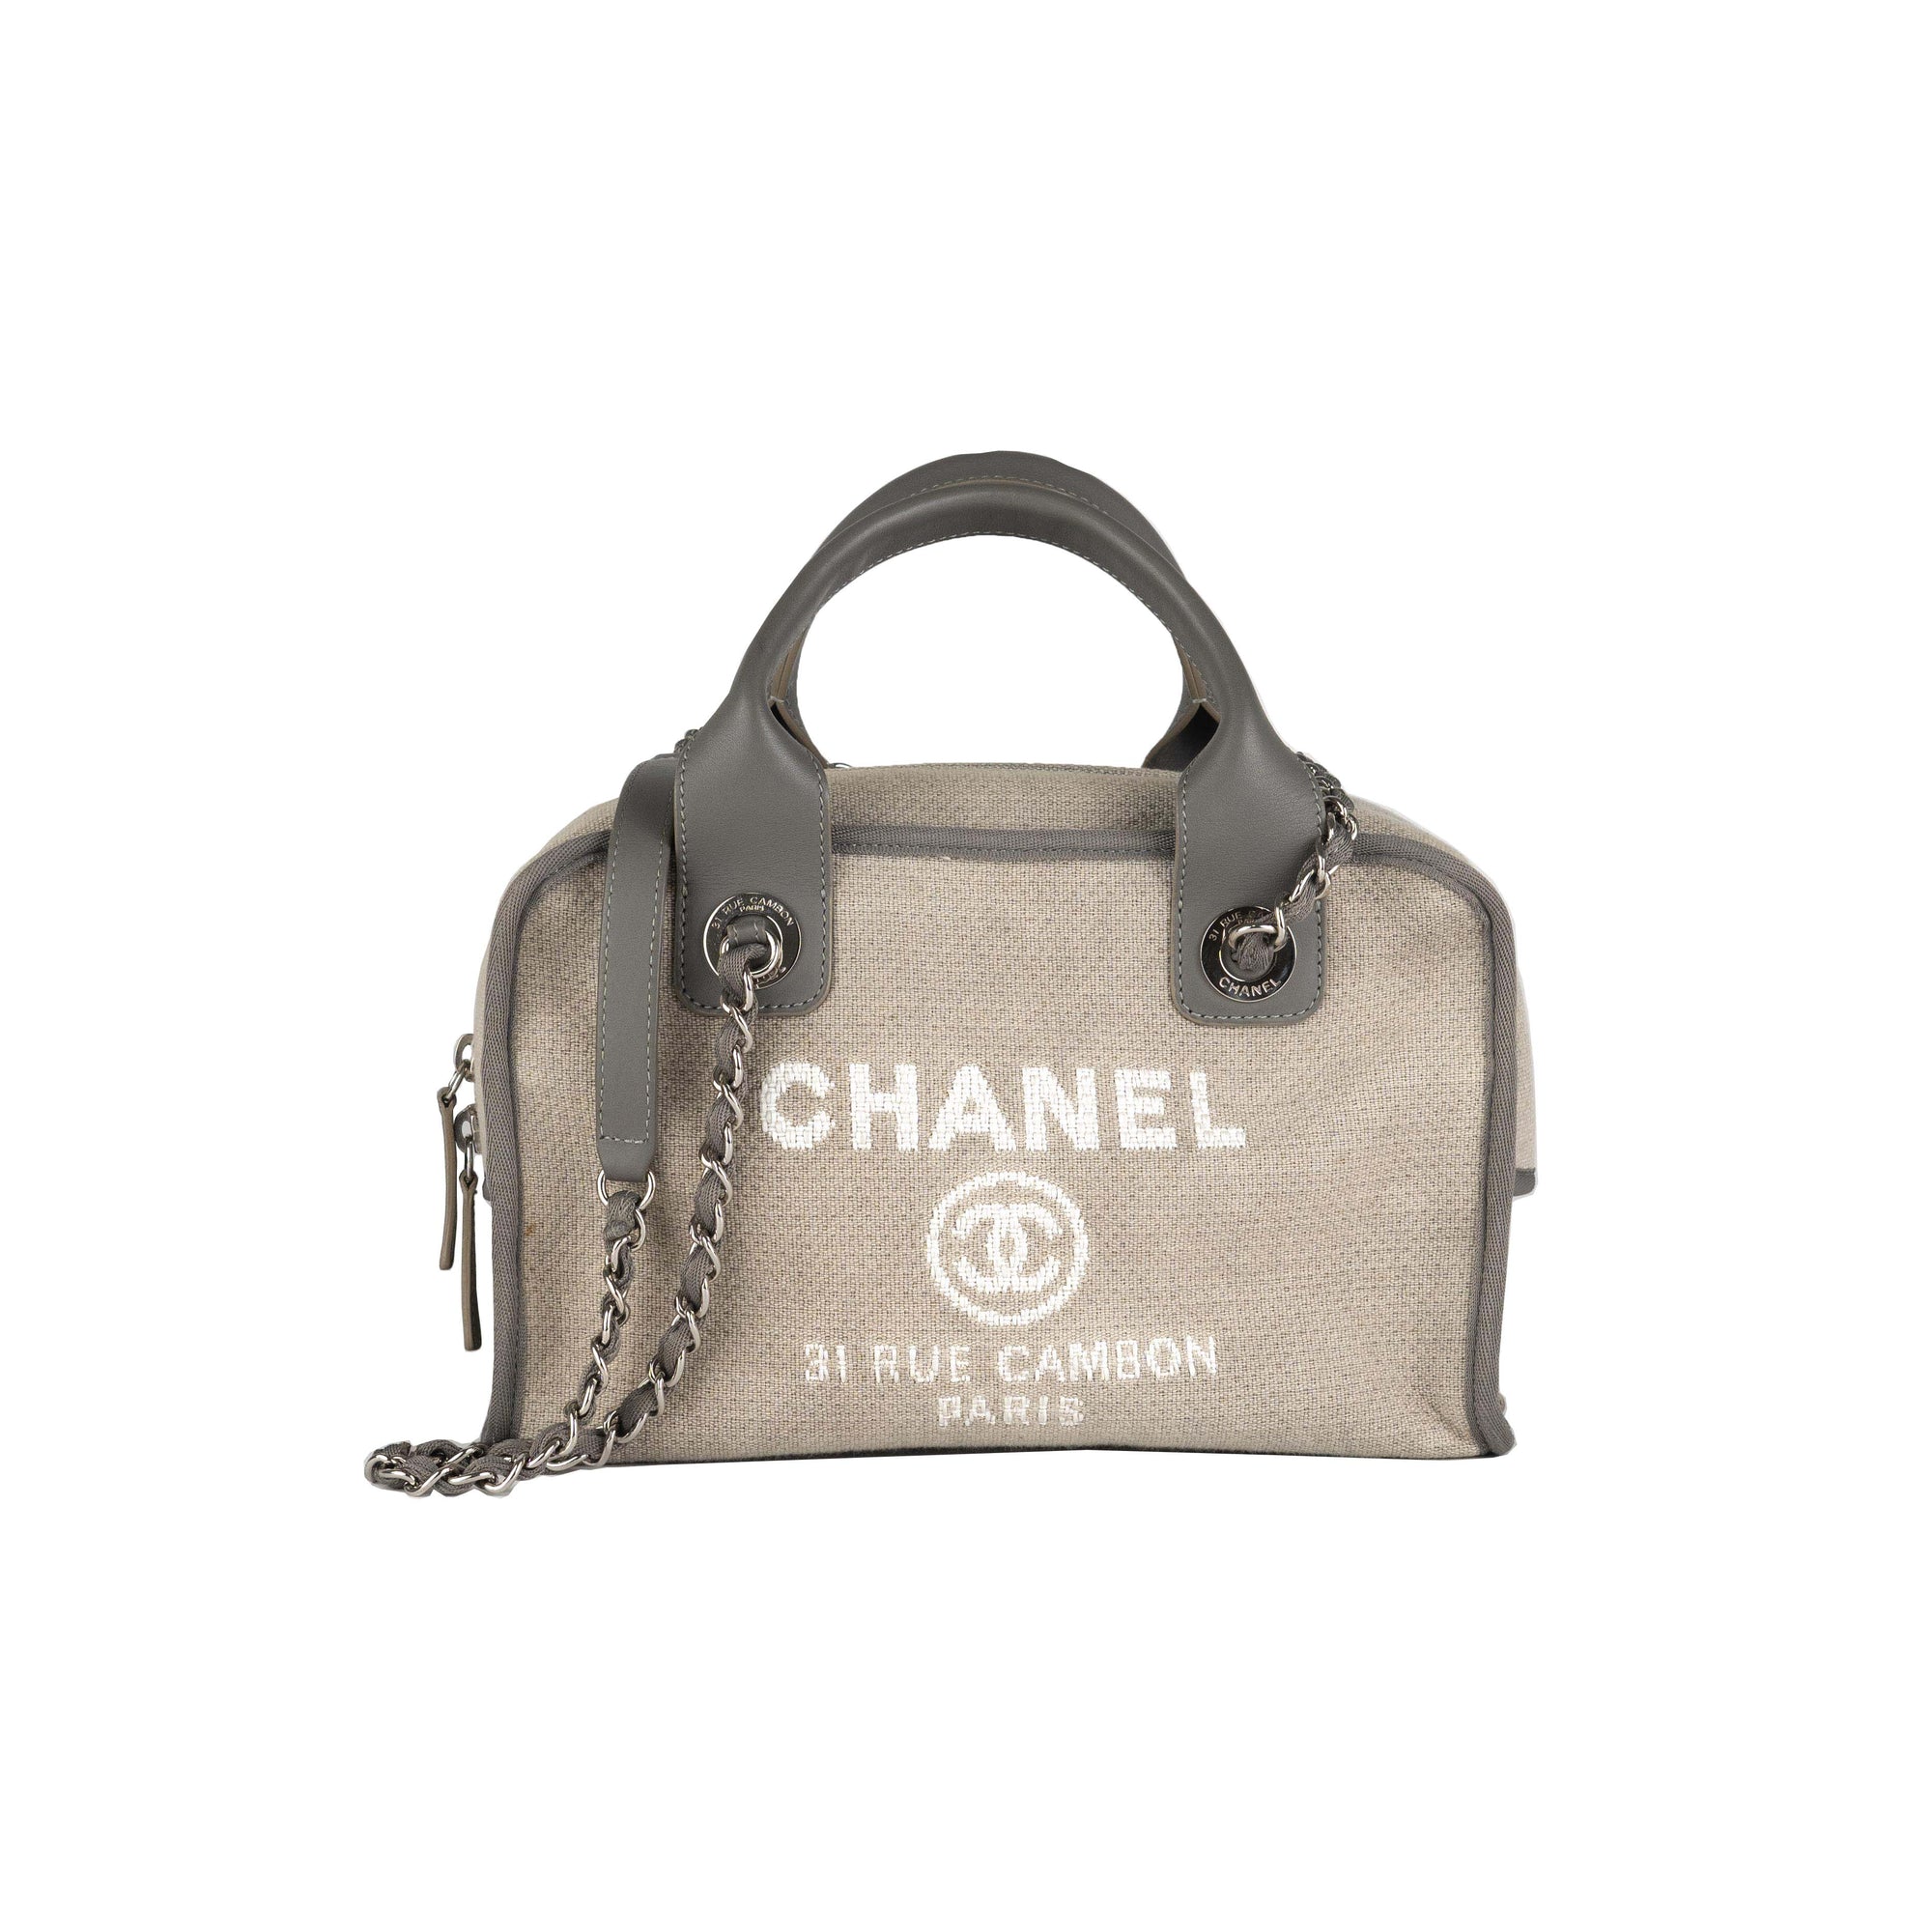 Chanel Deauville Bowling Bag